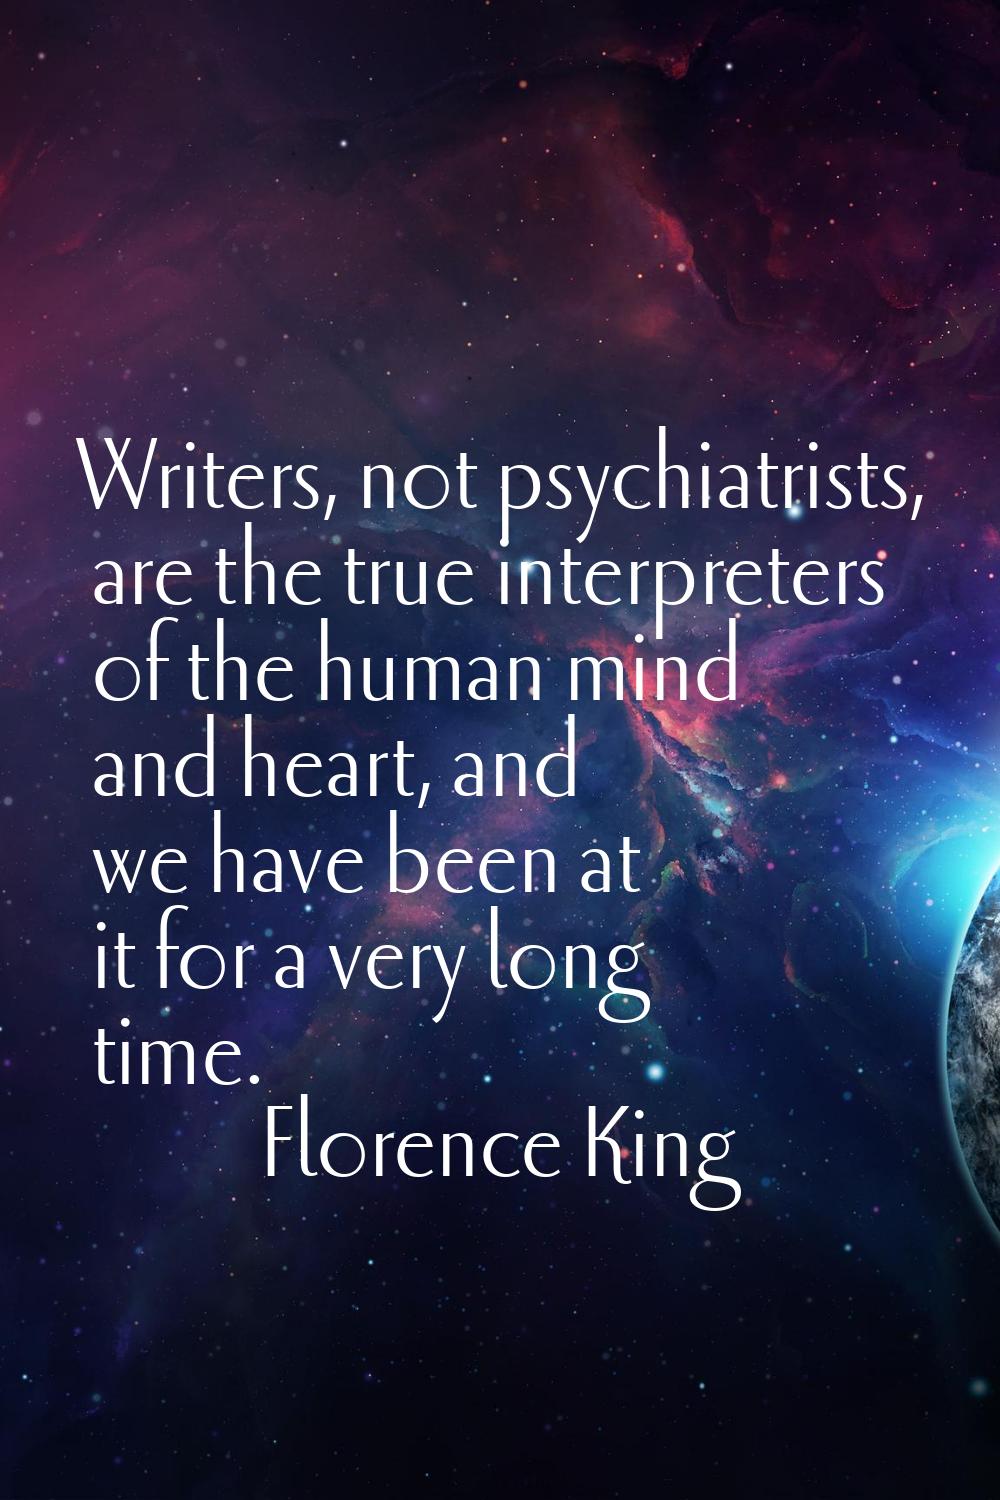 Writers, not psychiatrists, are the true interpreters of the human mind and heart, and we have been